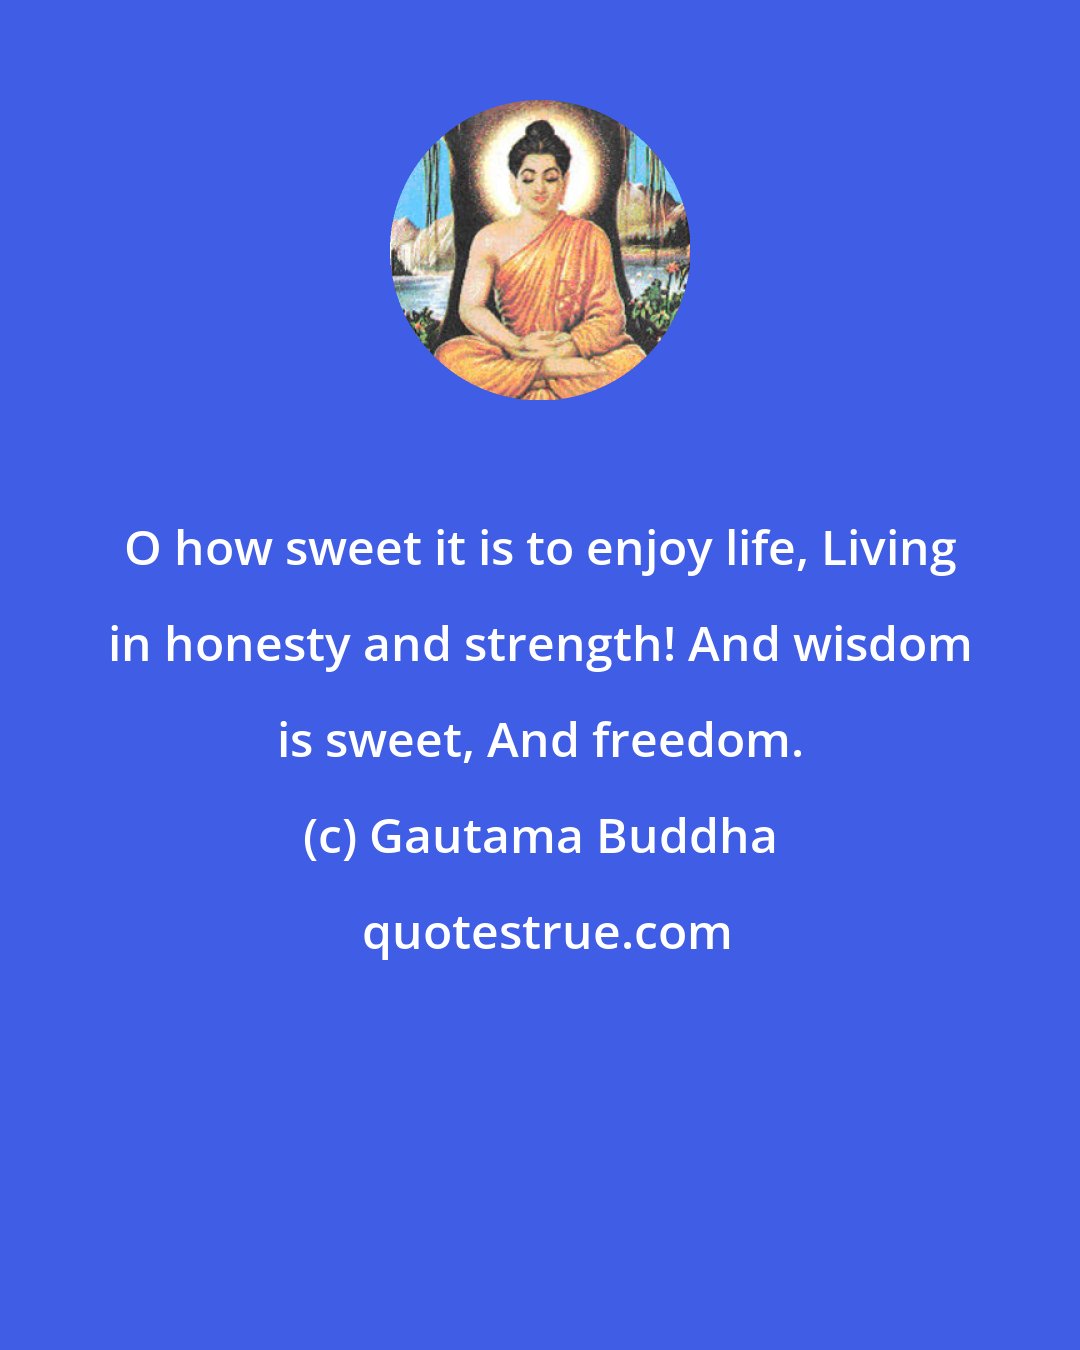 Gautama Buddha: O how sweet it is to enjoy life, Living in honesty and strength! And wisdom is sweet, And freedom.